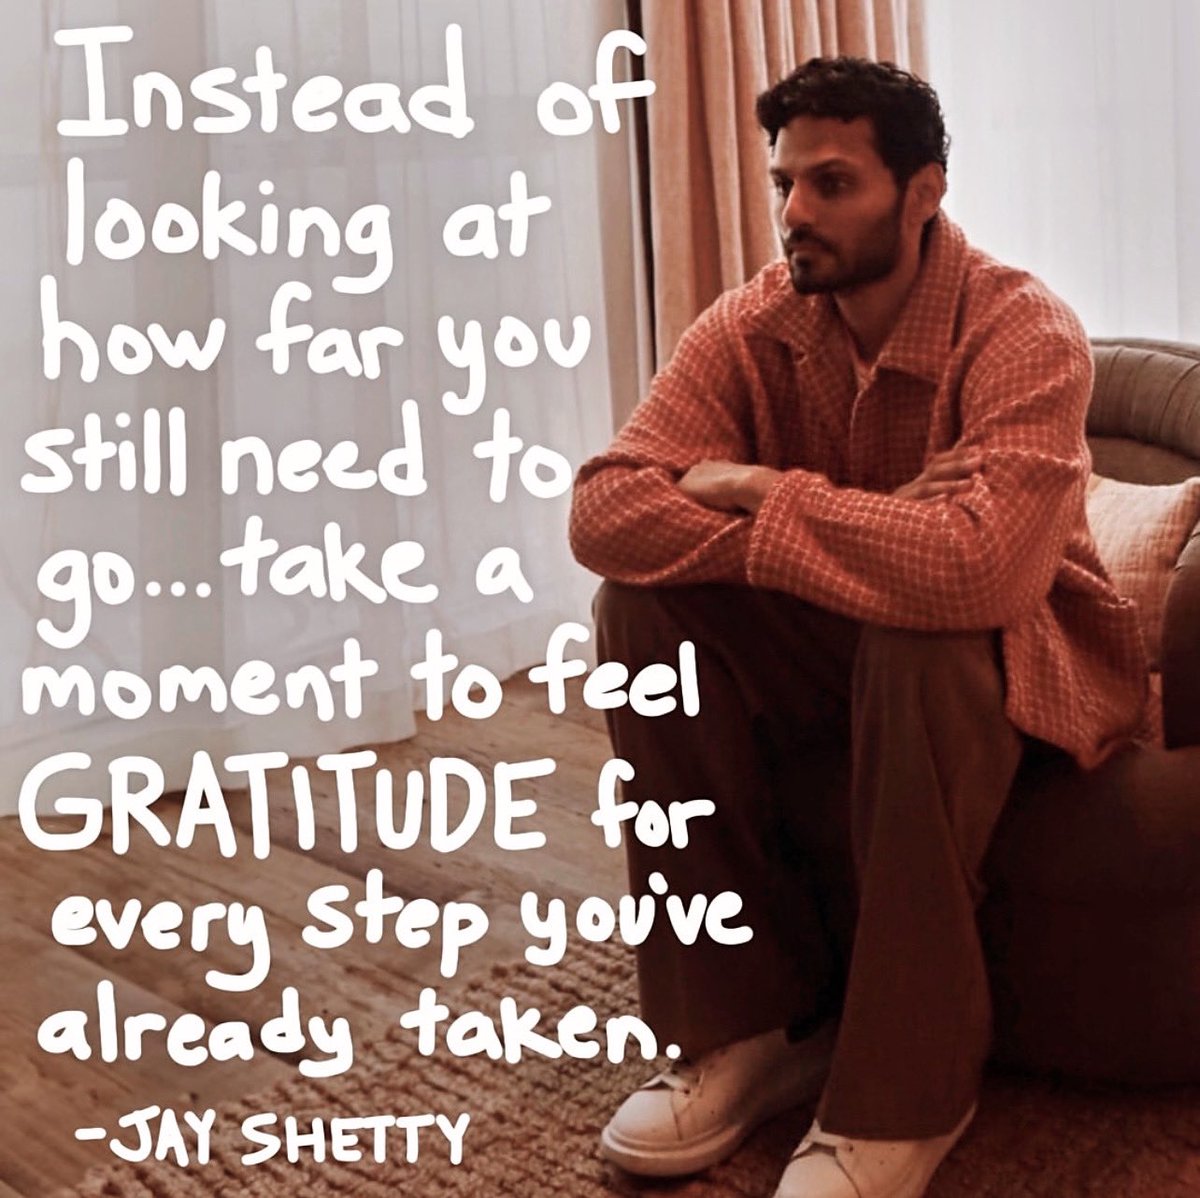 Instead of looking at how far you still need to go... Take a moment to feel #GRATITUDE for every Step you’ve already taken… 
— @jayshetty 
#Knowledge #Wisdom #Understanding #SelfAwareness #SelfLove #Worthy #Mindset #Purpose 
#WorkInProgress #EmbraceTheJourney #OwnYourLife